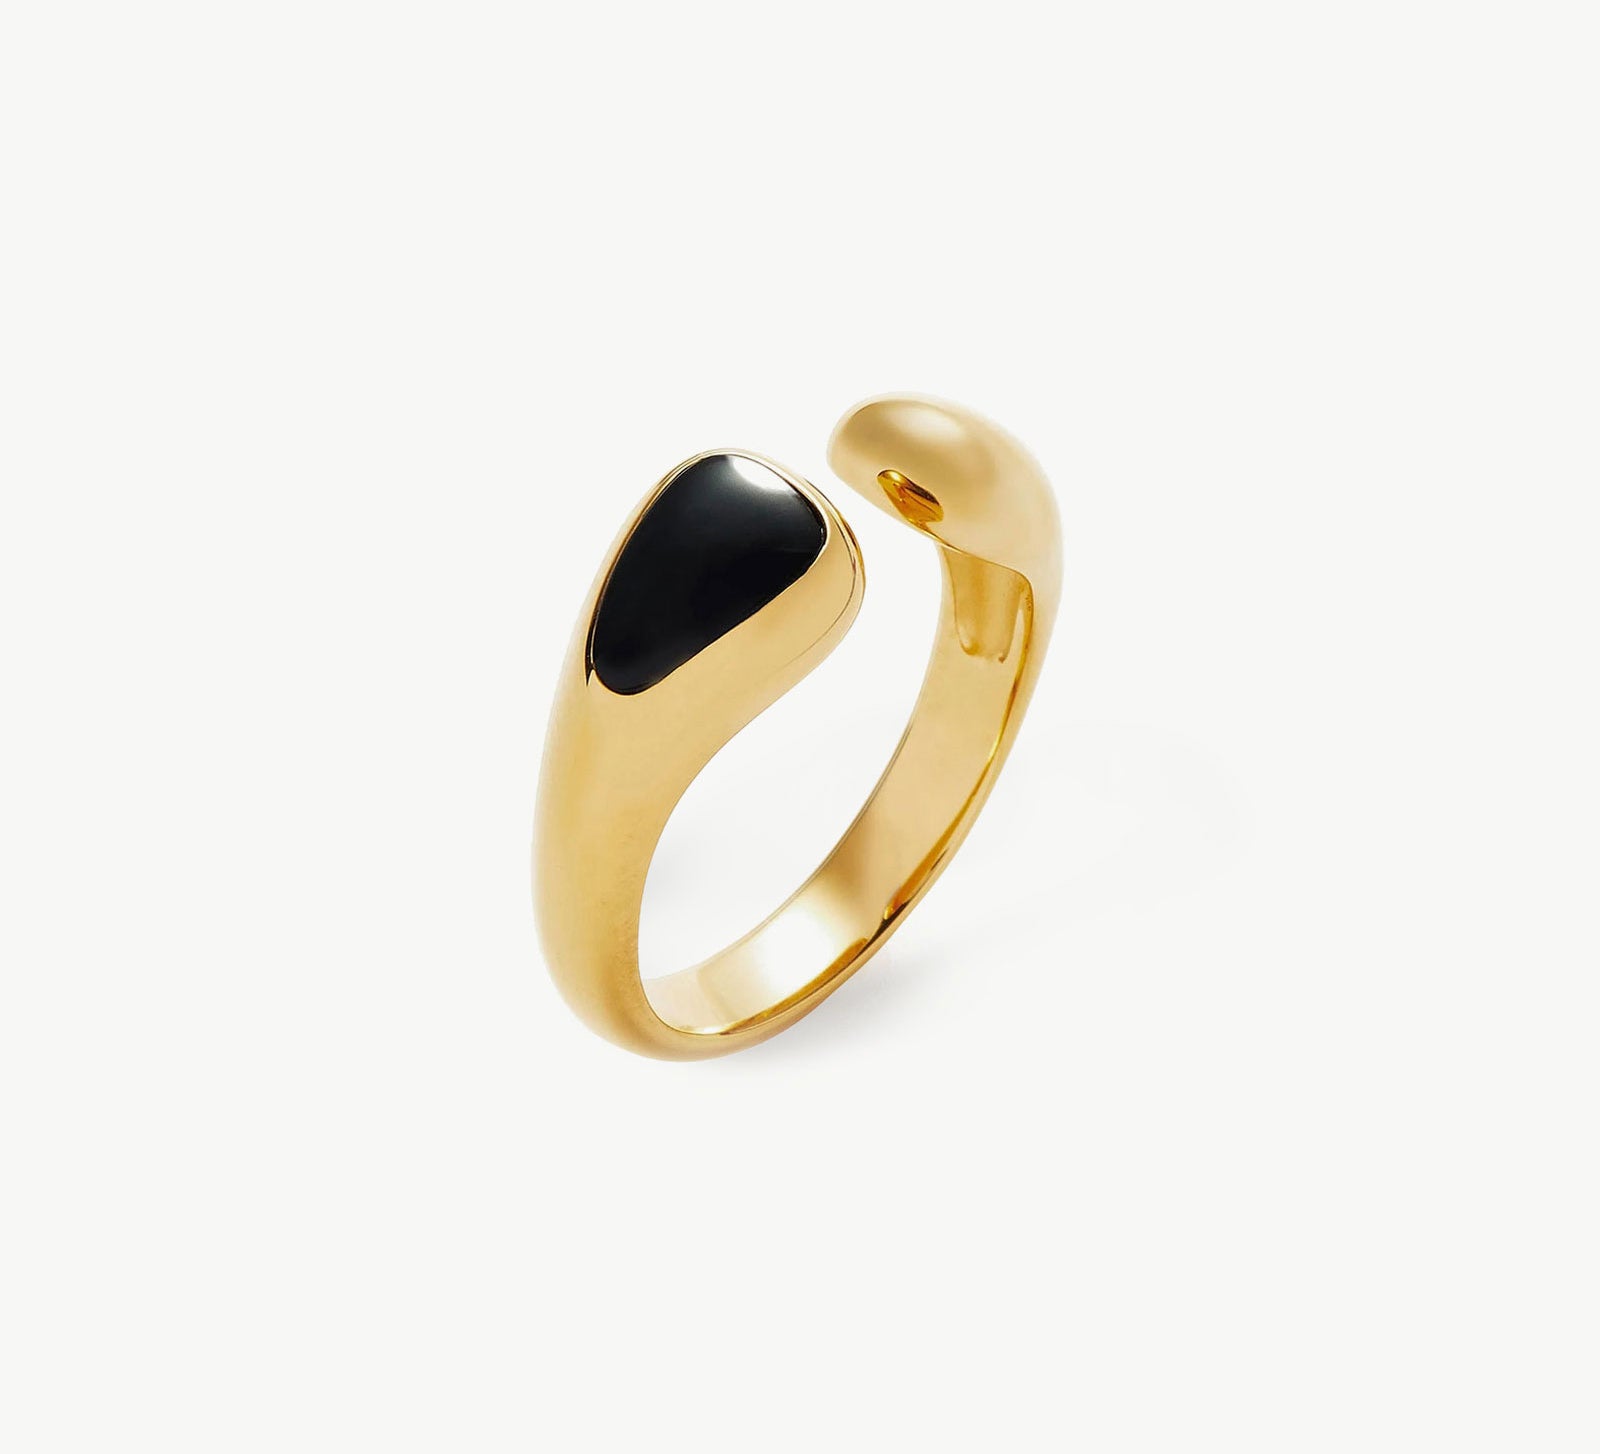 Sleek Onyx Elegance: Savi Sculptural Onyx Open Ring in black, a chic and modern accessory with a touch of edgy sophistication